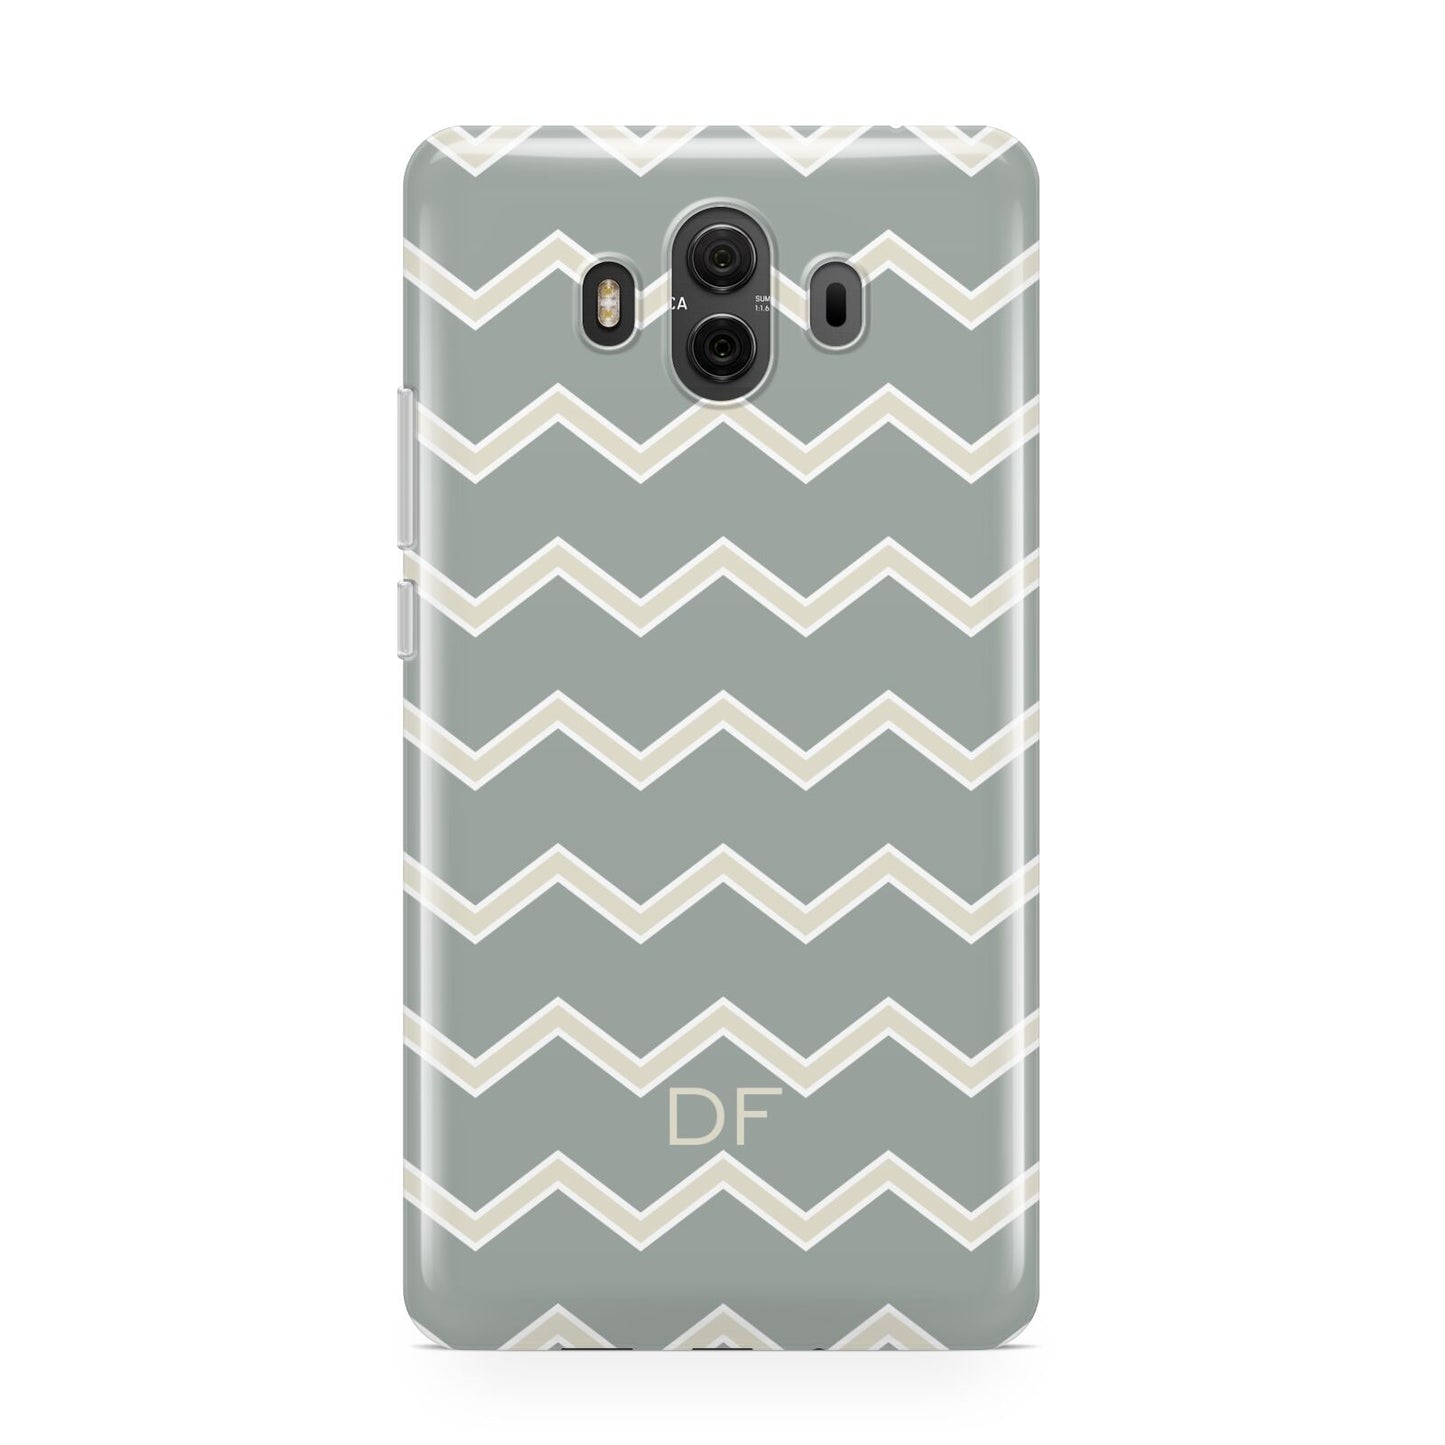 Personalised 2 Tone Chevron Huawei Mate 10 Protective Phone Case